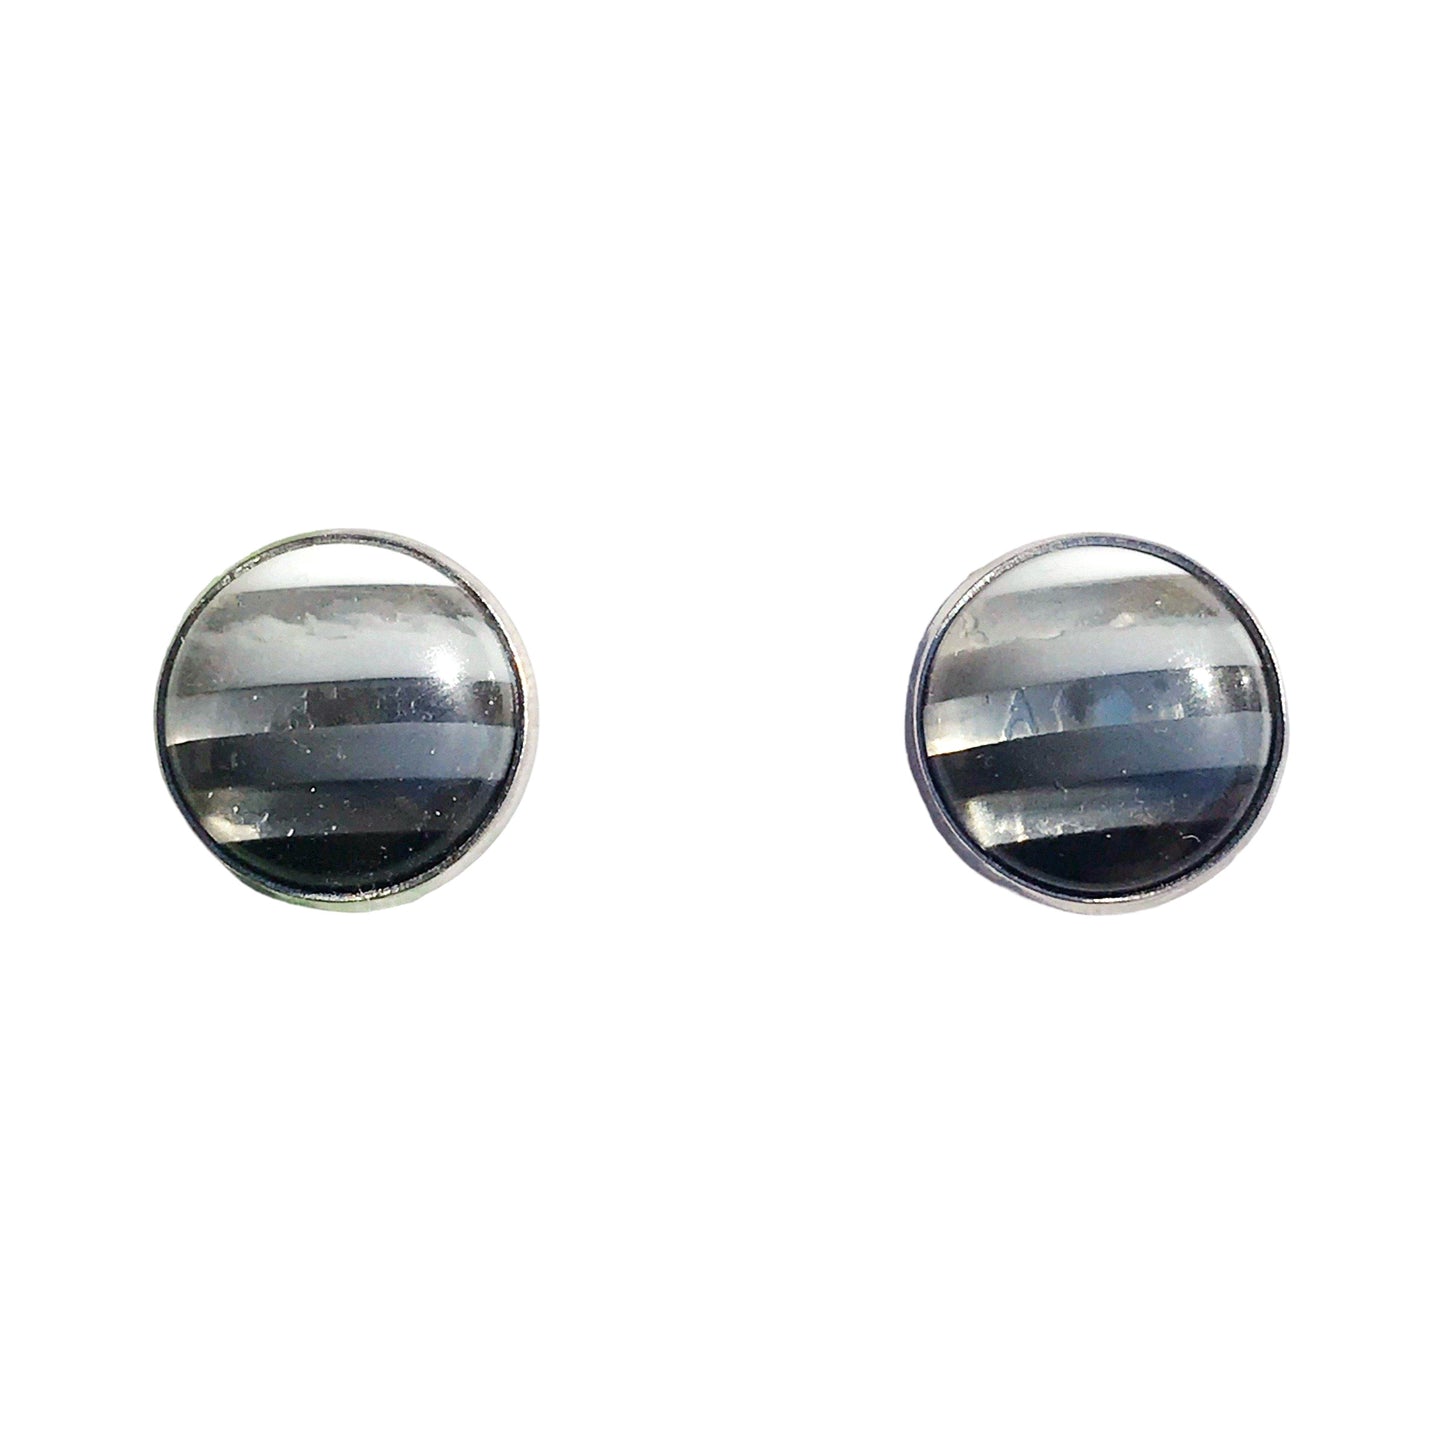 Black, Gray, & White Striped Stud Earrings - Sleek & Contemporary Accessories